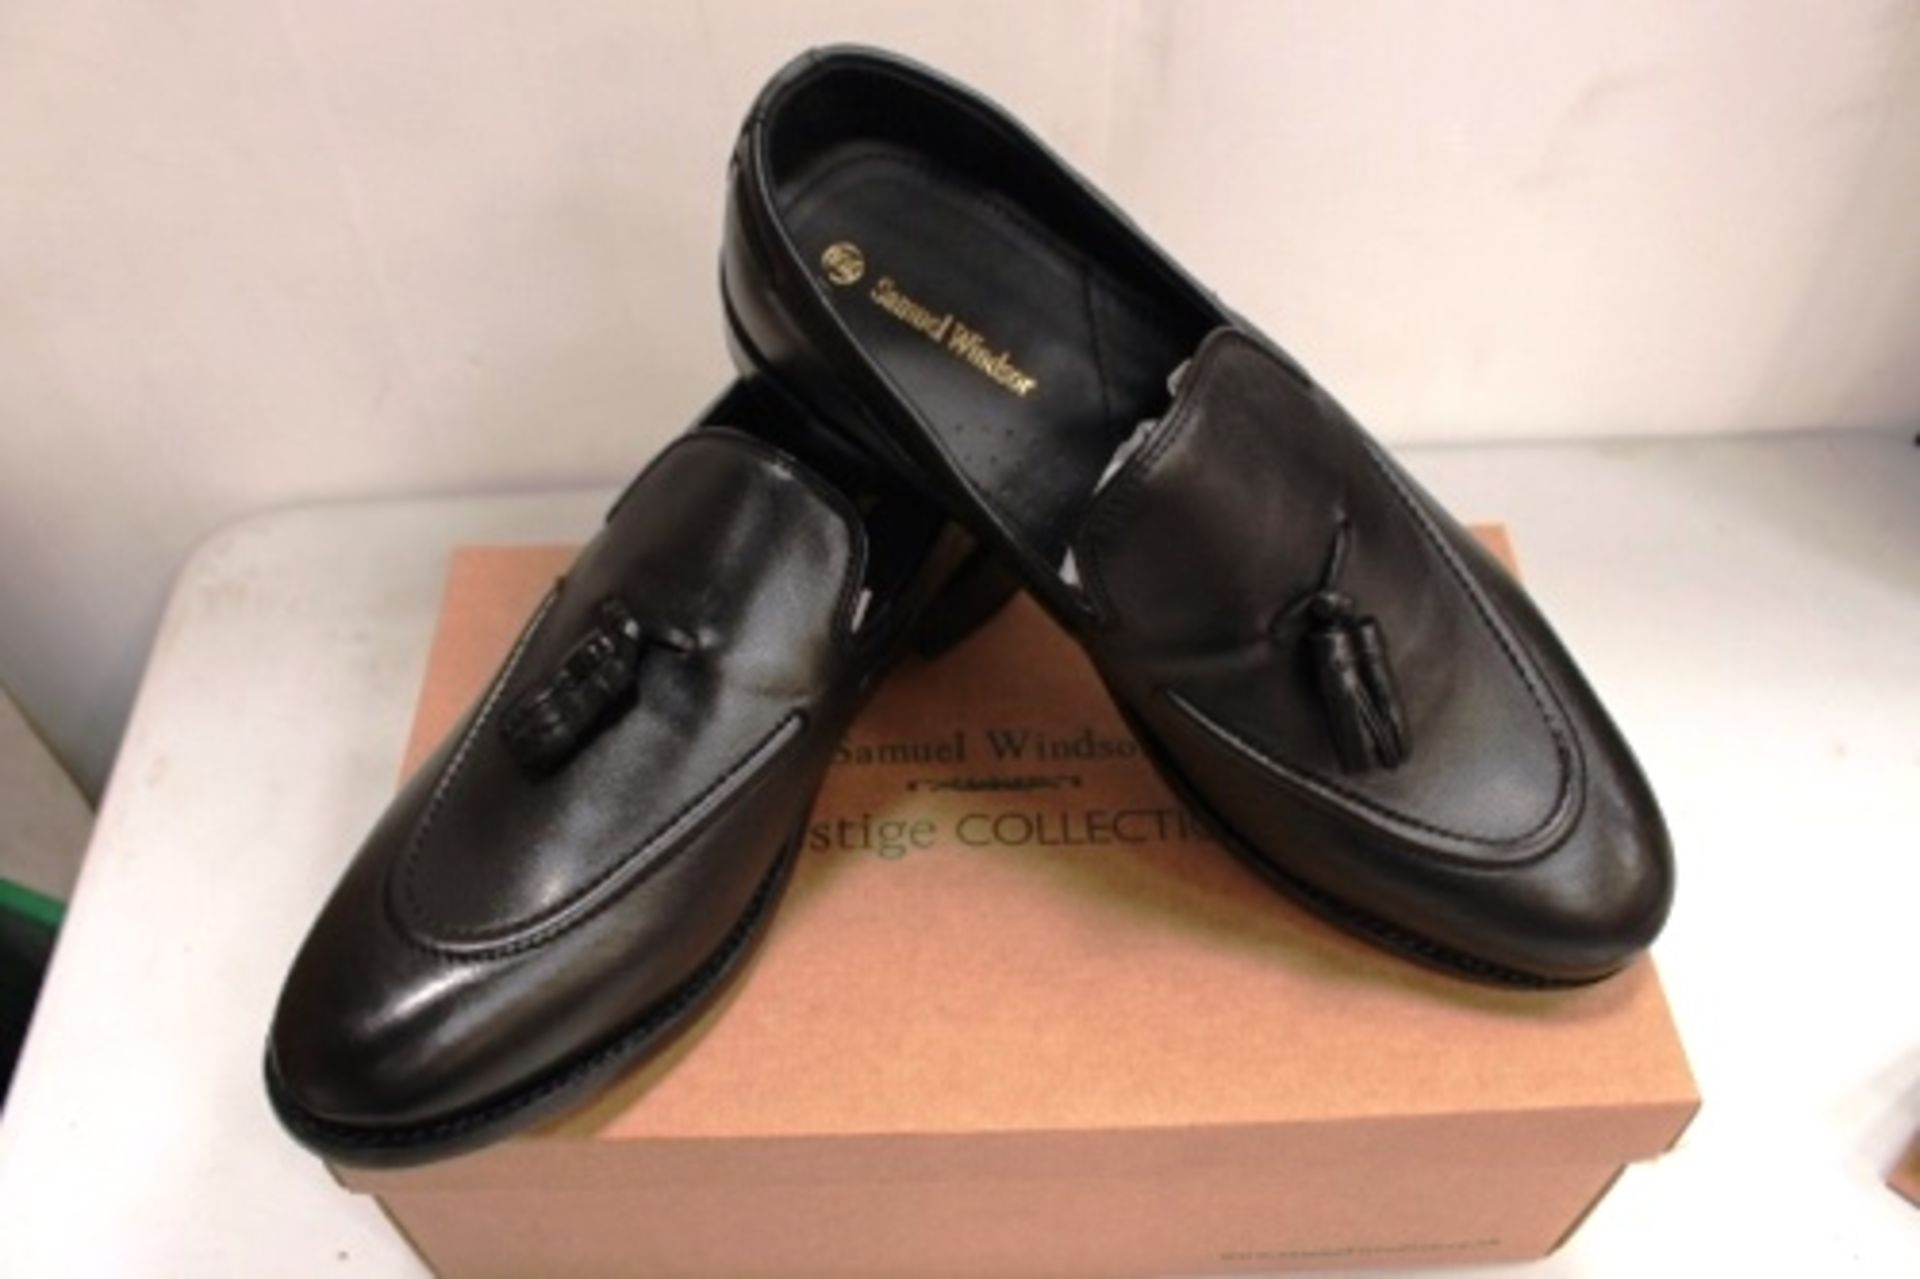 1 x pair of Samuel Windsor men's shoes, style code BV115, size 10.5 - New in box (EB5)